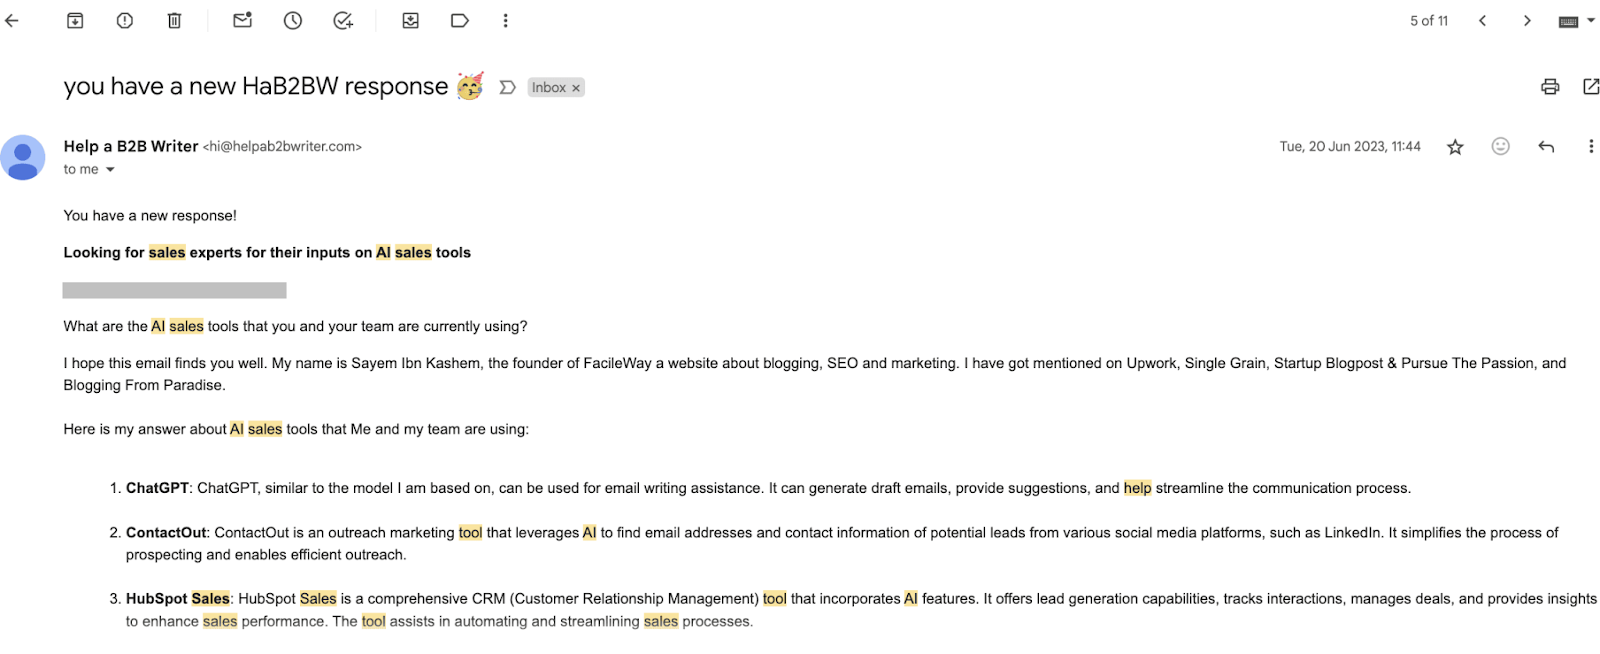 Email from a writer via "Help a B2B Writer," offering inputs on AI sales tools with details about ChatGPT, ContactOut, etc.